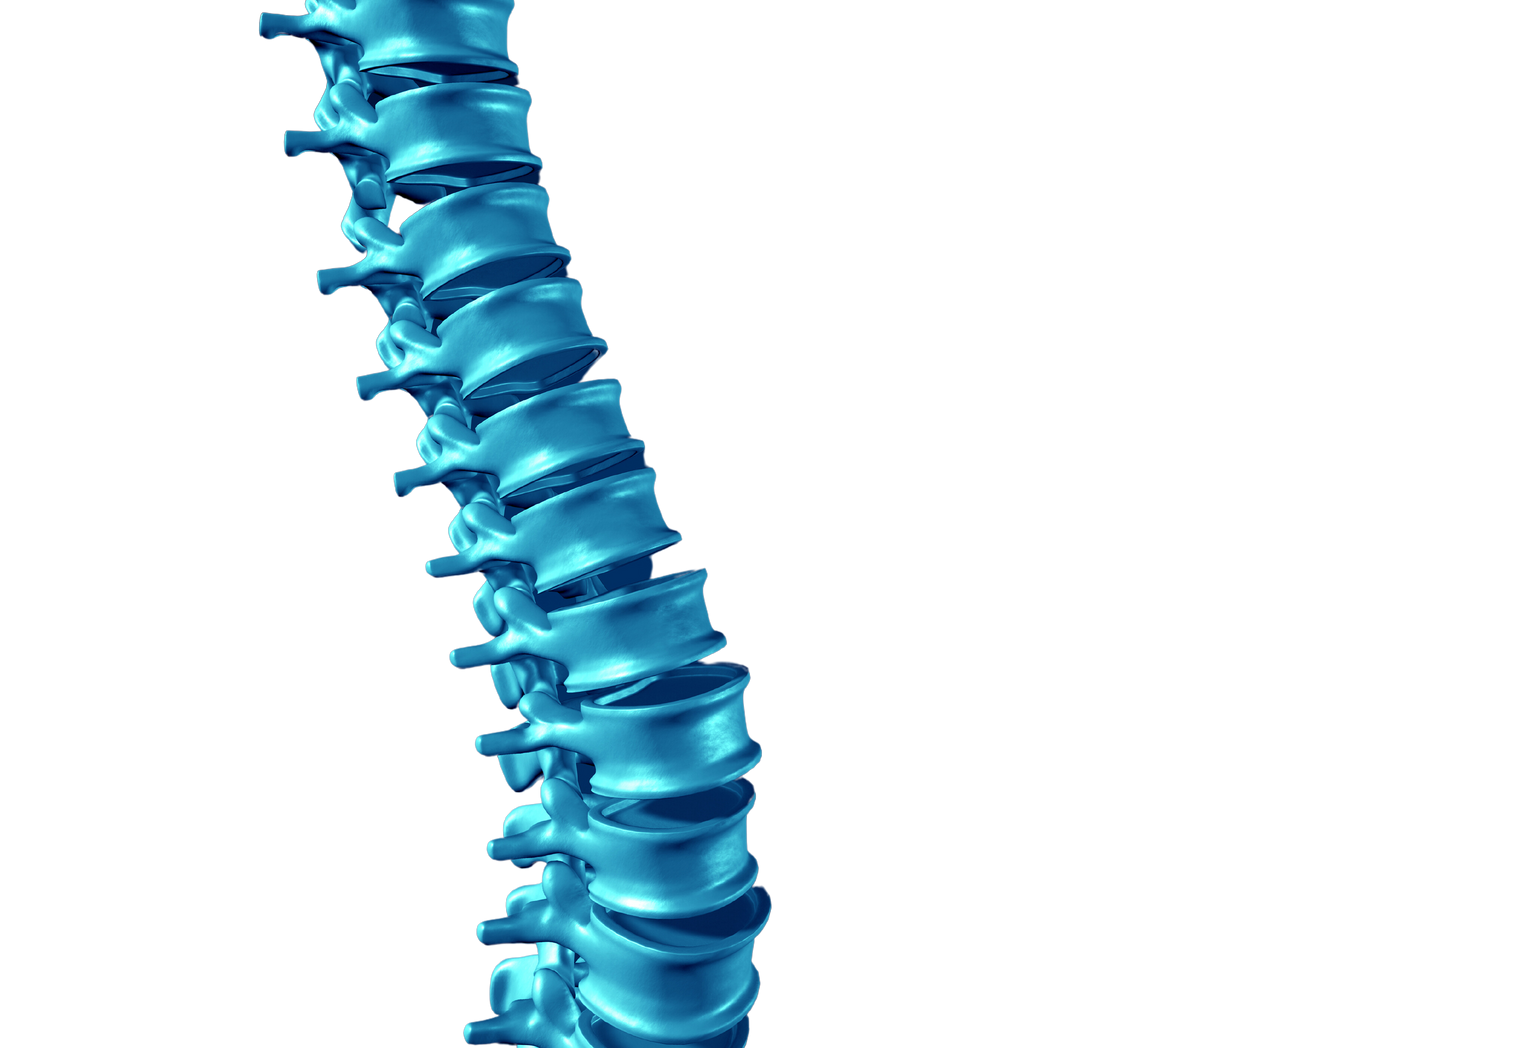 Human Spine Concept